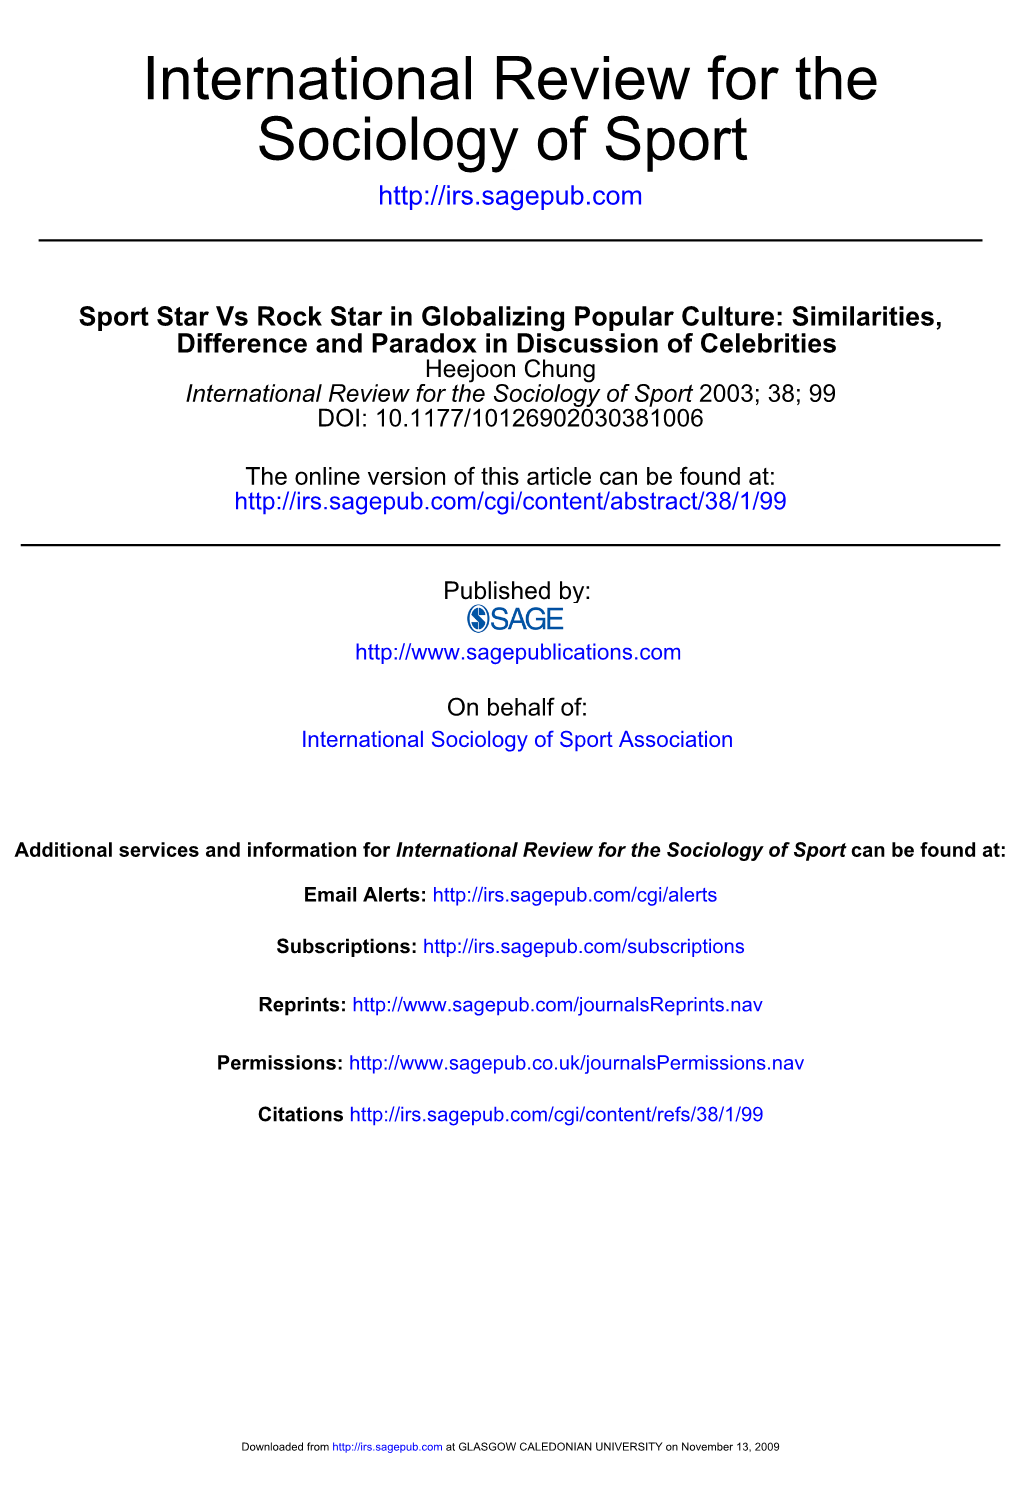 Sociology of Sport International Review For